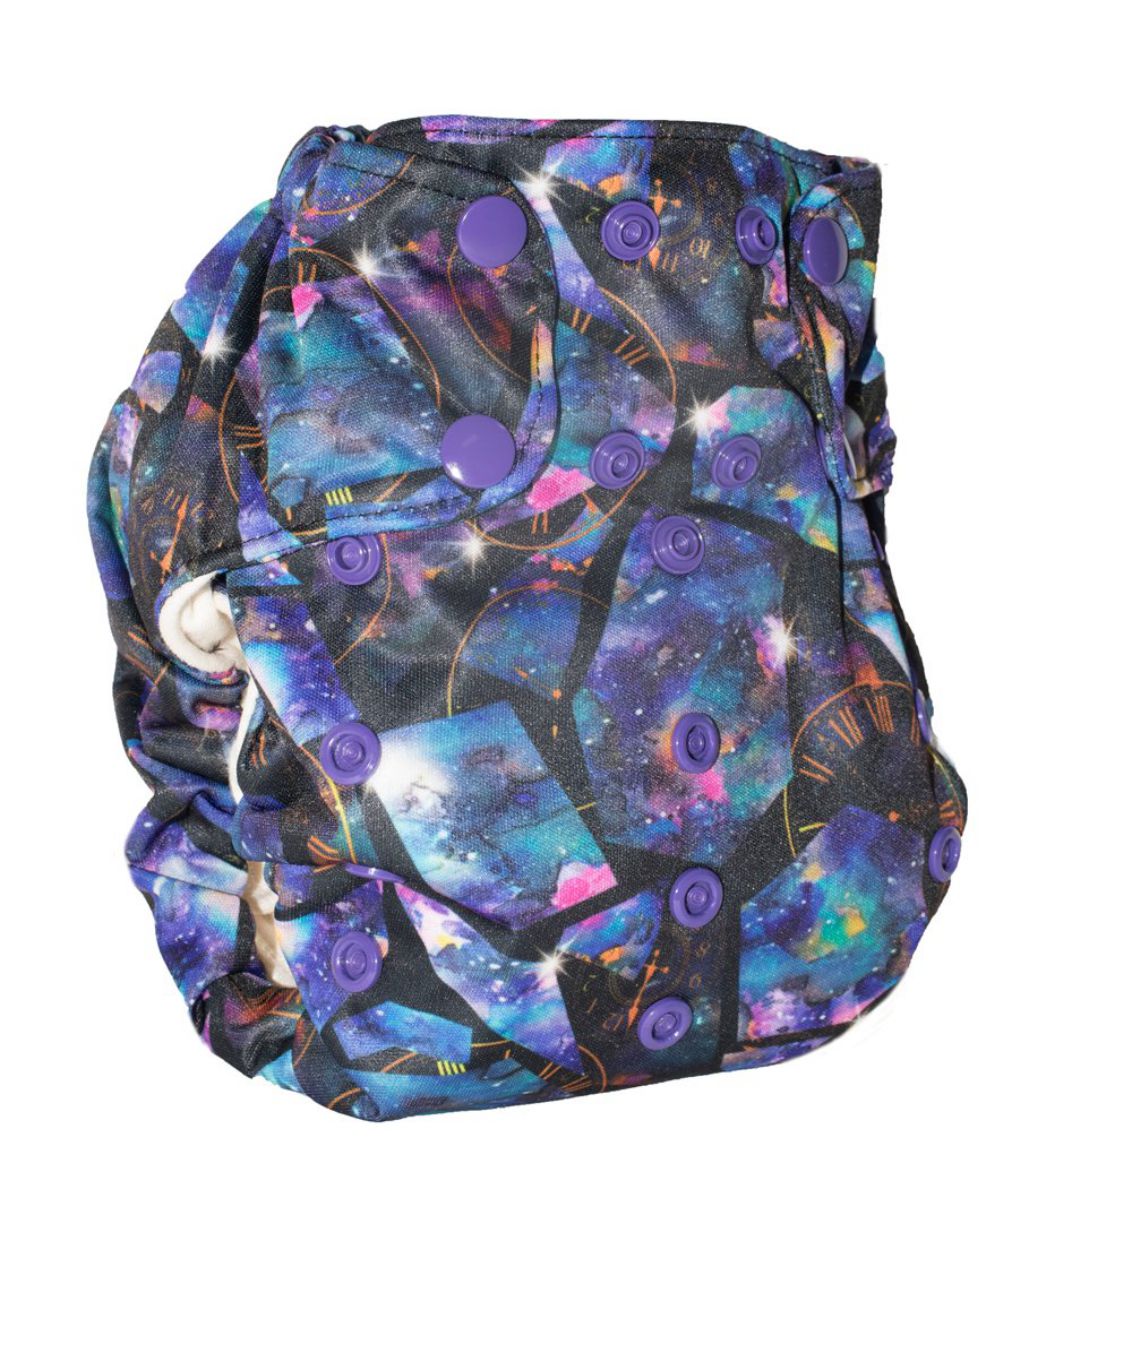 Smart Bottoms 3.1 One Size All-in-One nappy Pattern: The Fourth Dimension